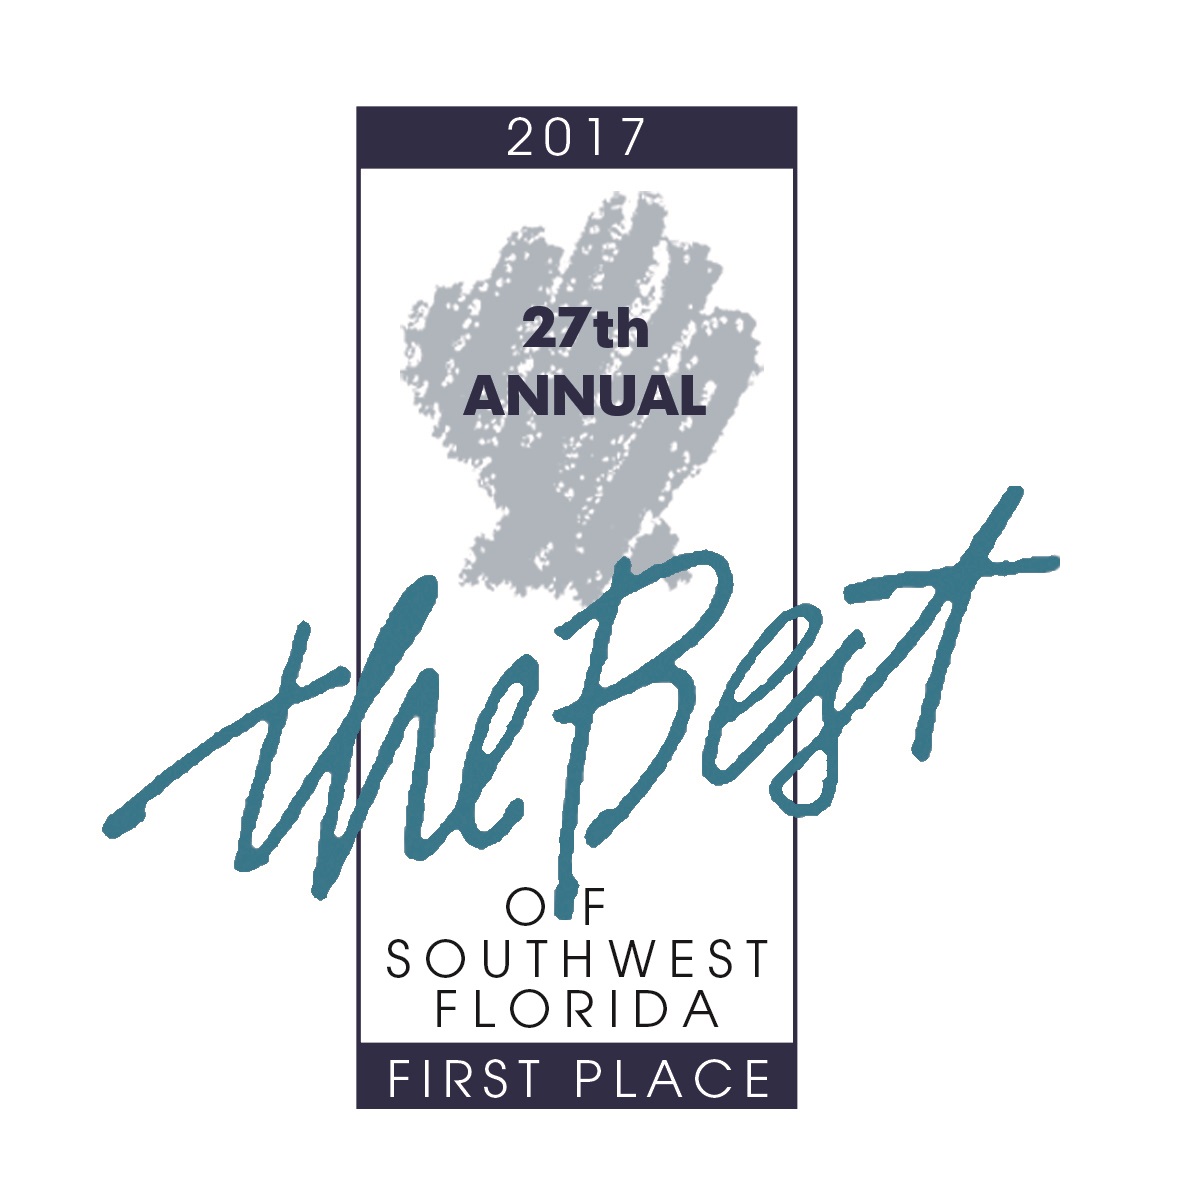 2017 LOGO FIRST PLACE 003